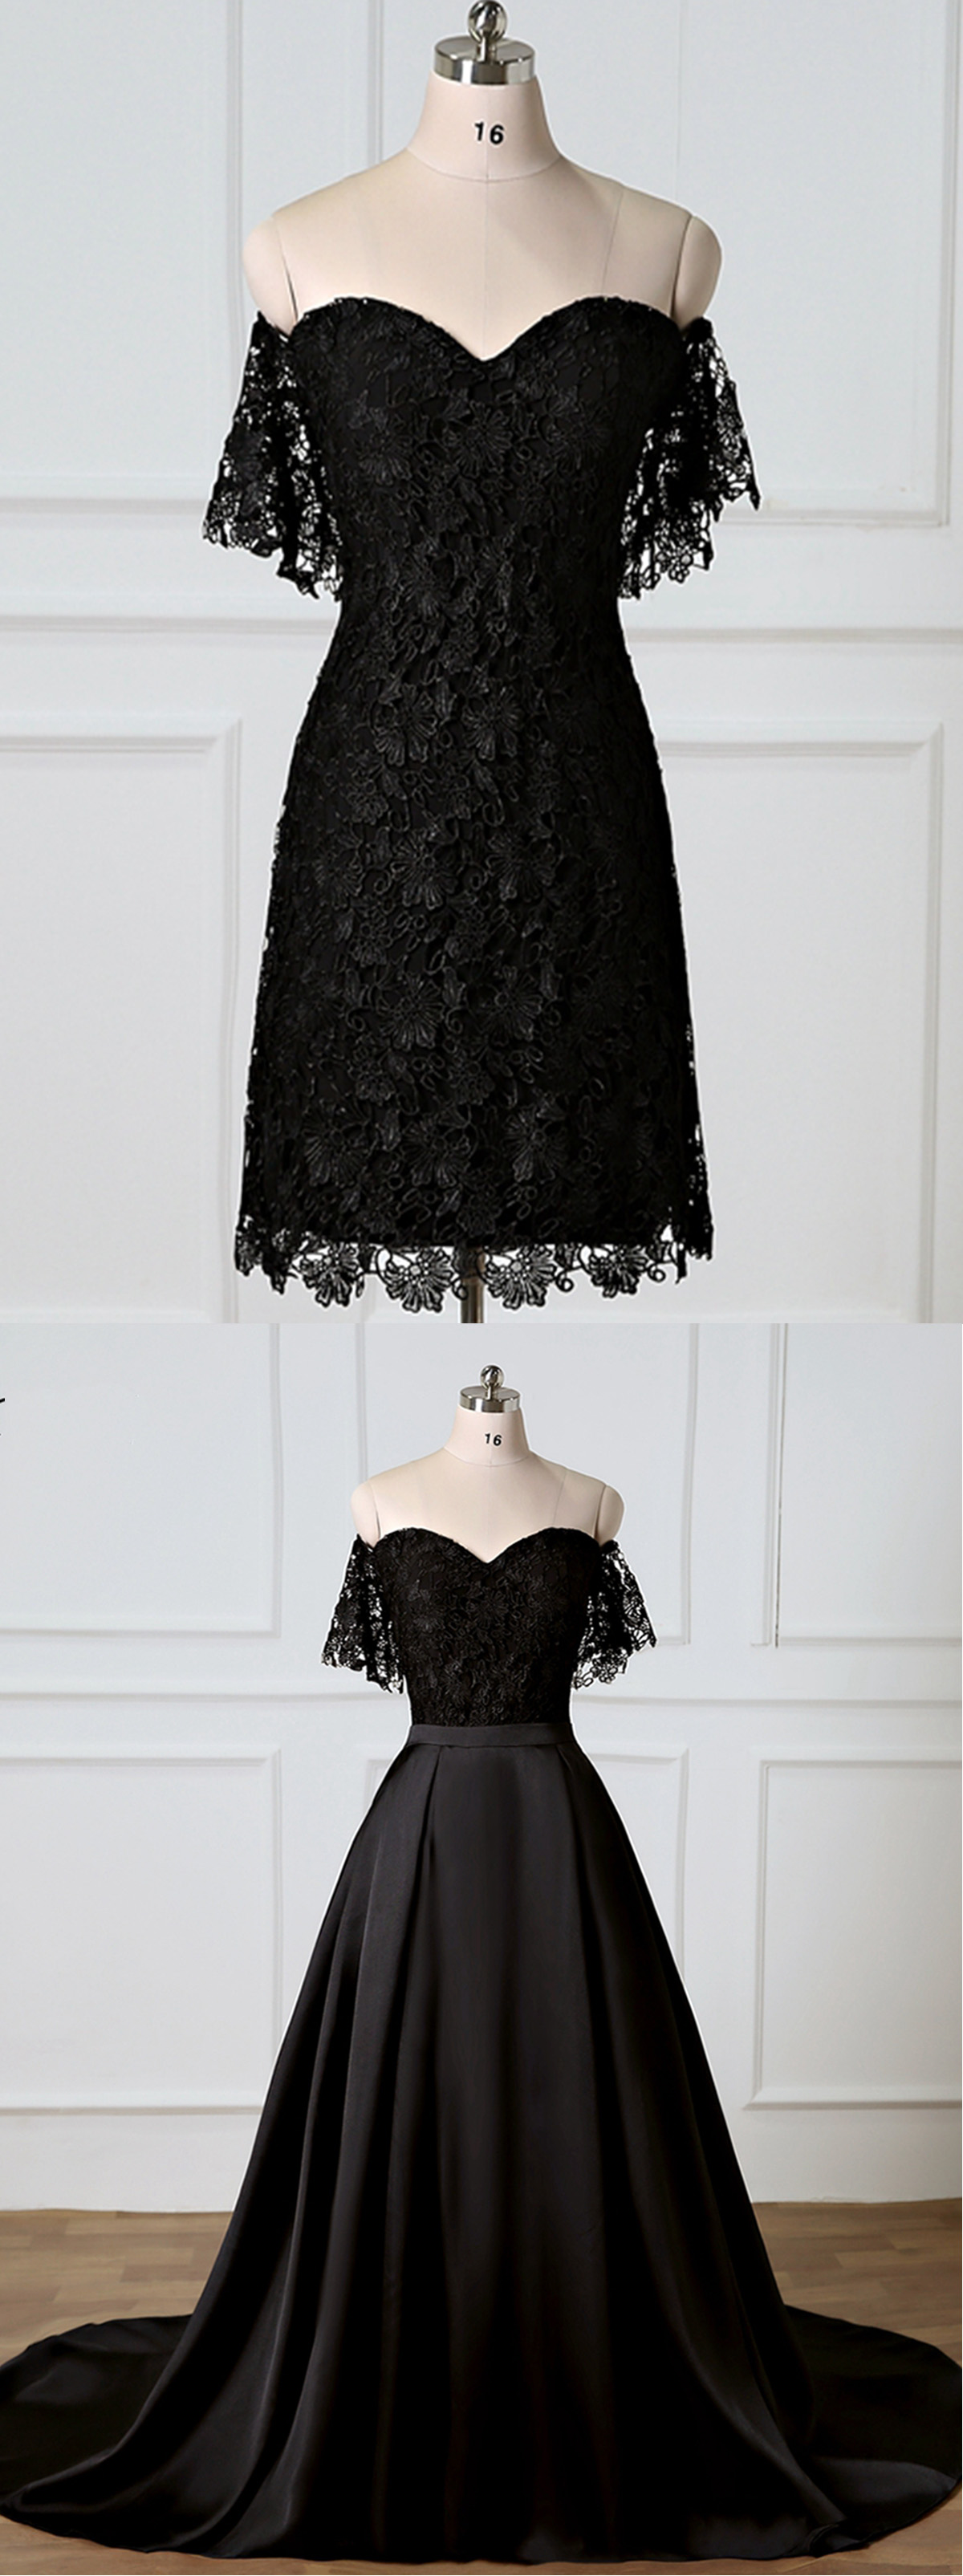 Sweetheart Black Lace Off Shoulder Long Prom Dress With Removable Skirt